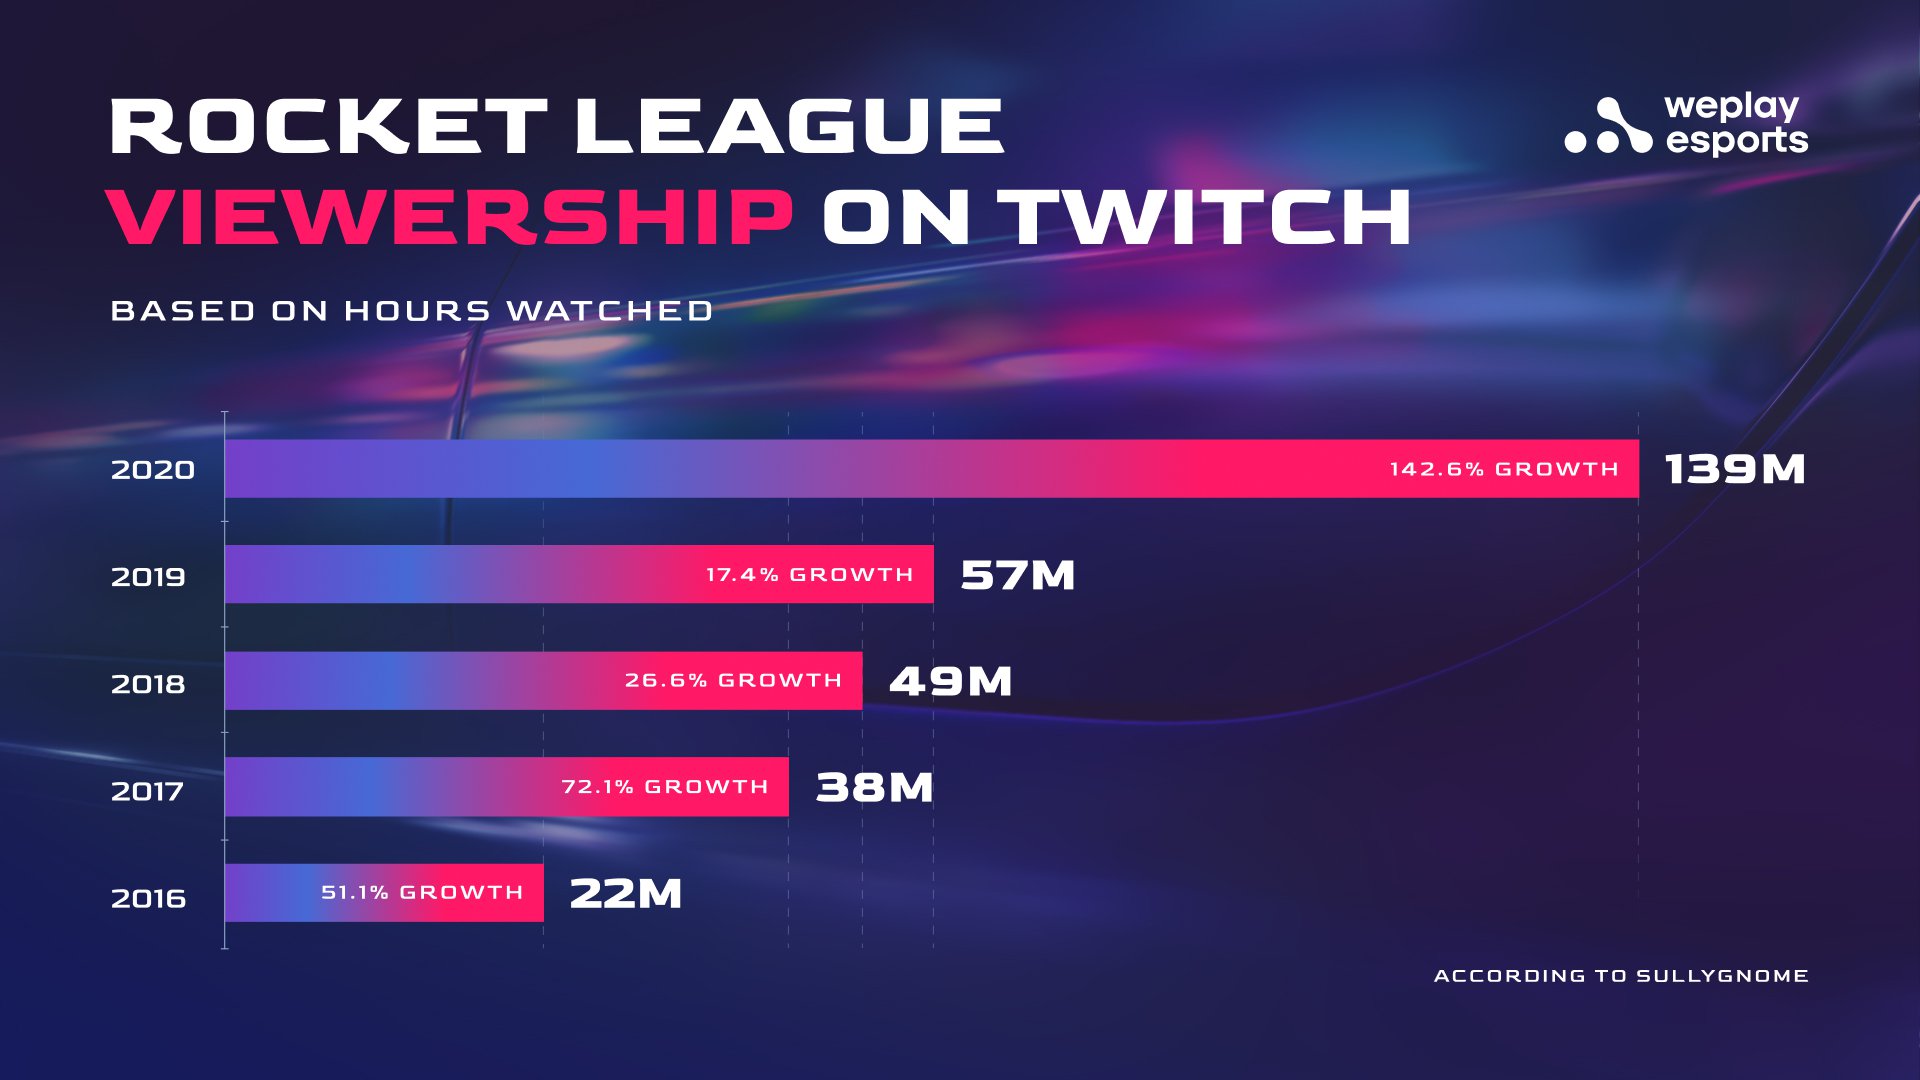 Rocket League viewership on Twitch based on hours watched according to SullyGnome. Image: WePlay Holding